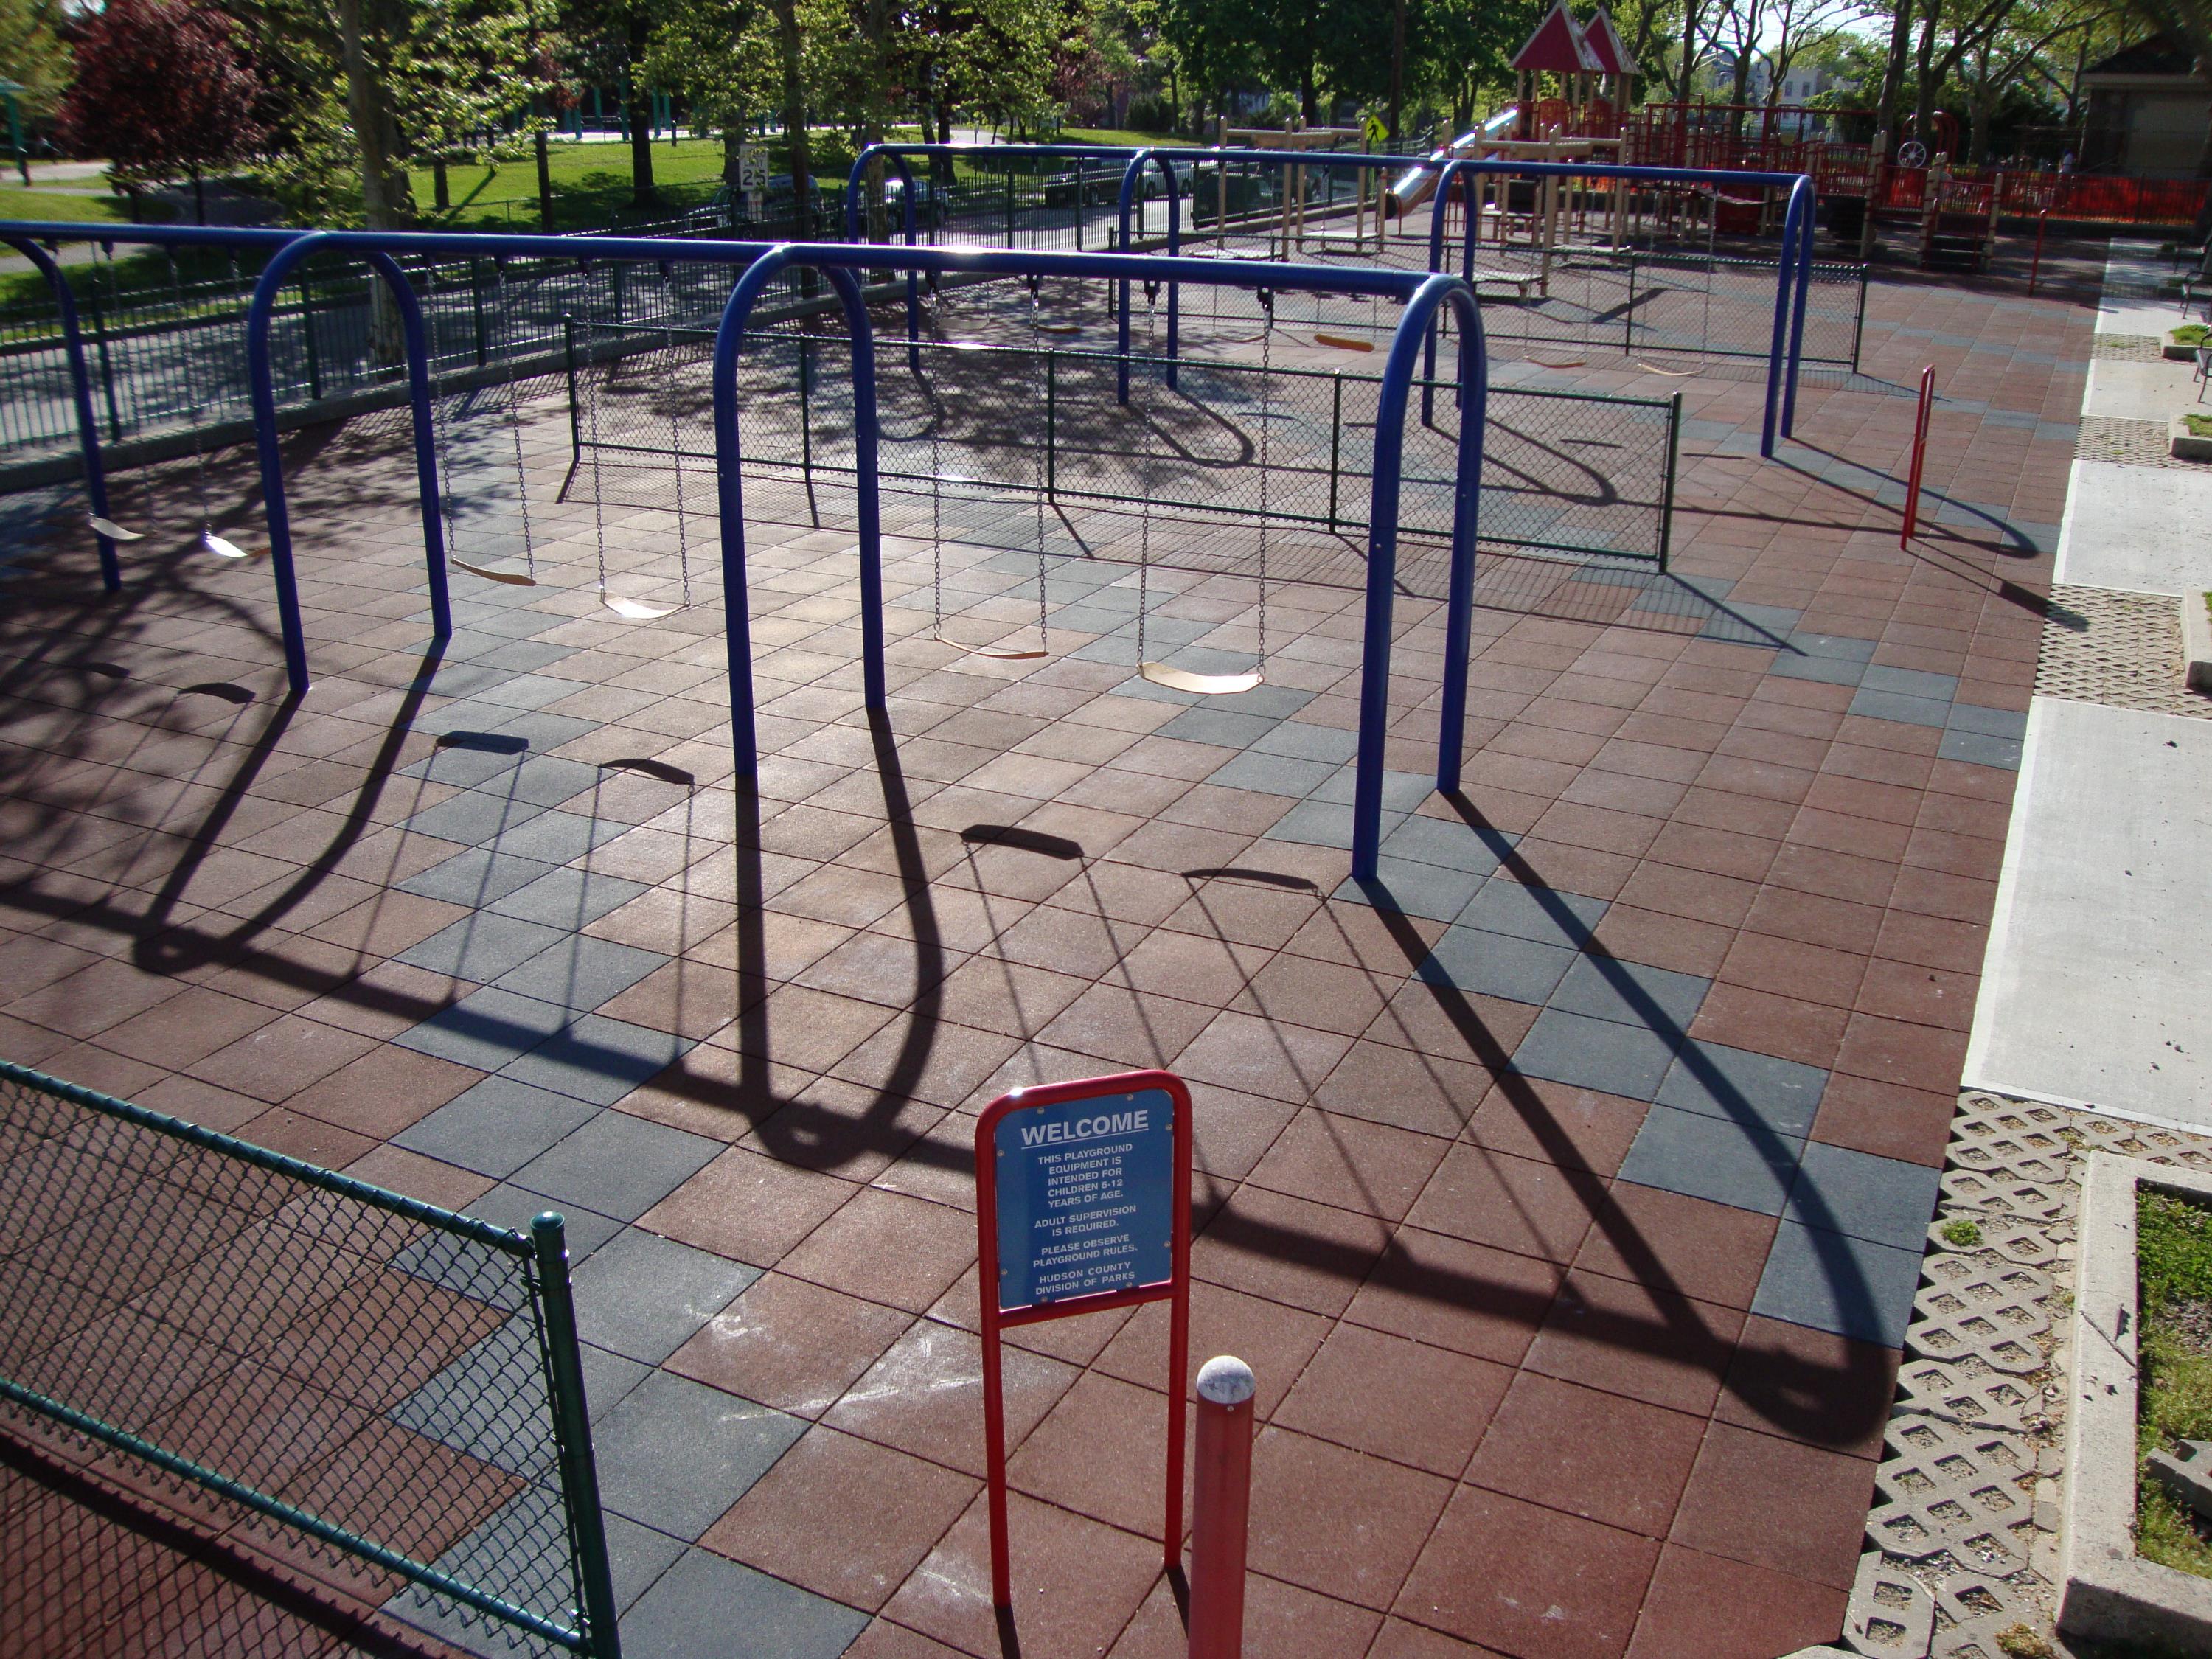 Large Public Park with Multiple Playgrounds Using Designs r